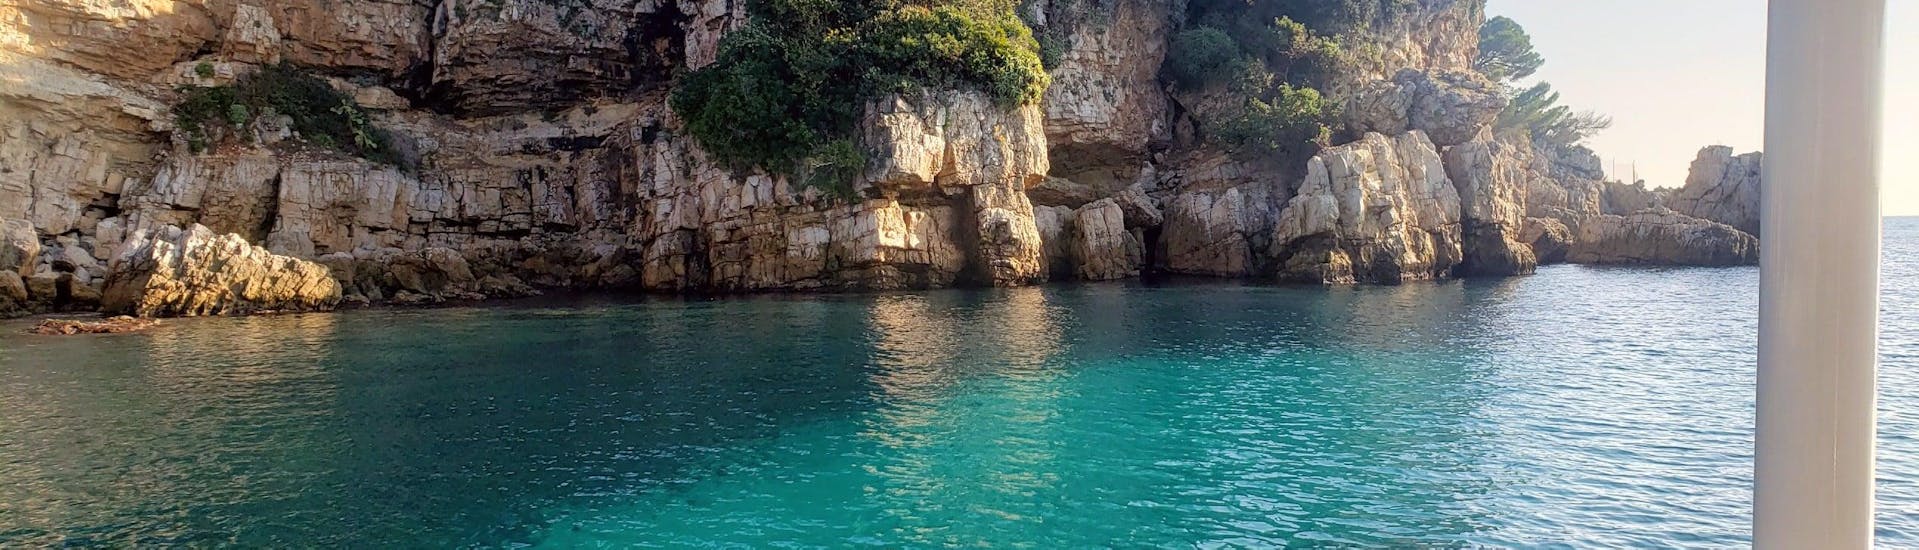 View of the cliffs near the Cap d'Antibes that can be admired during a Private Catamaran Trip to the Cap d'Antibes with Swimming with SeaZen.